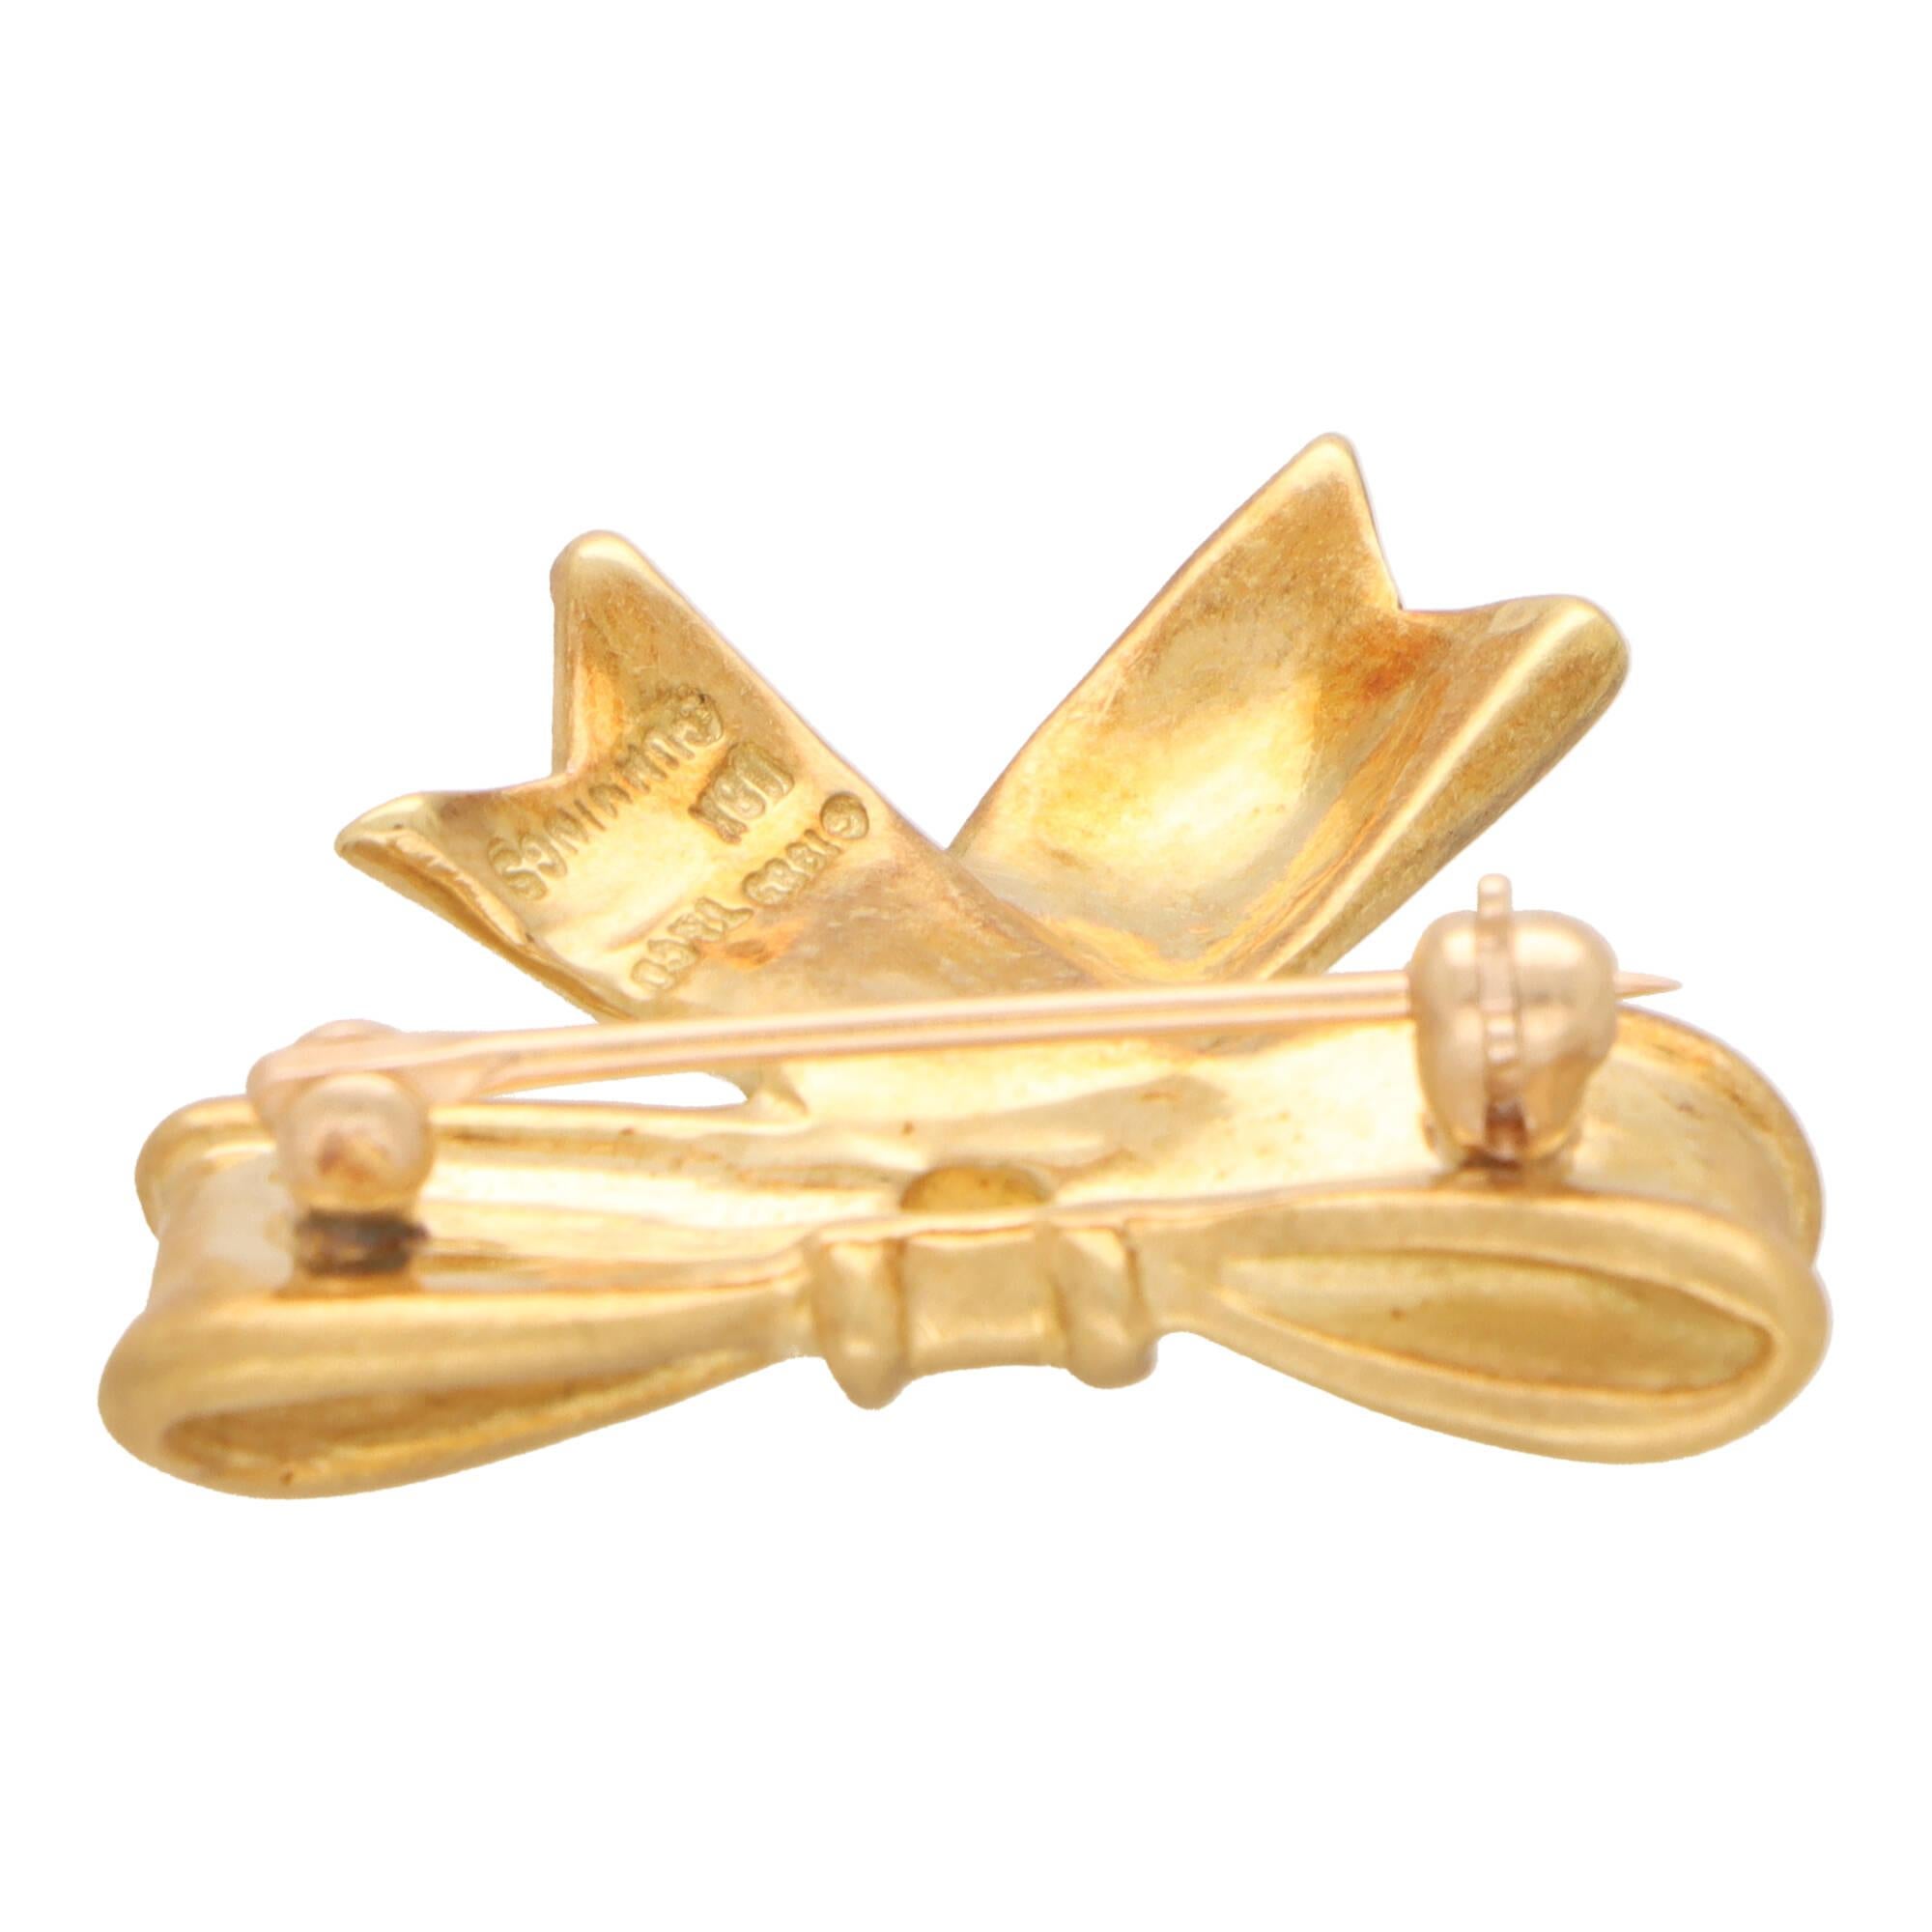 A beautiful vintage Angela Cummings for Tiffany & Co. bow brooch set in 18k yellow gold.

The brooch is composed of an elegant bow motif, made of brushed 18k yellow gold. It is secured to reverse with a long pin roller clasp fitting.

Due to the